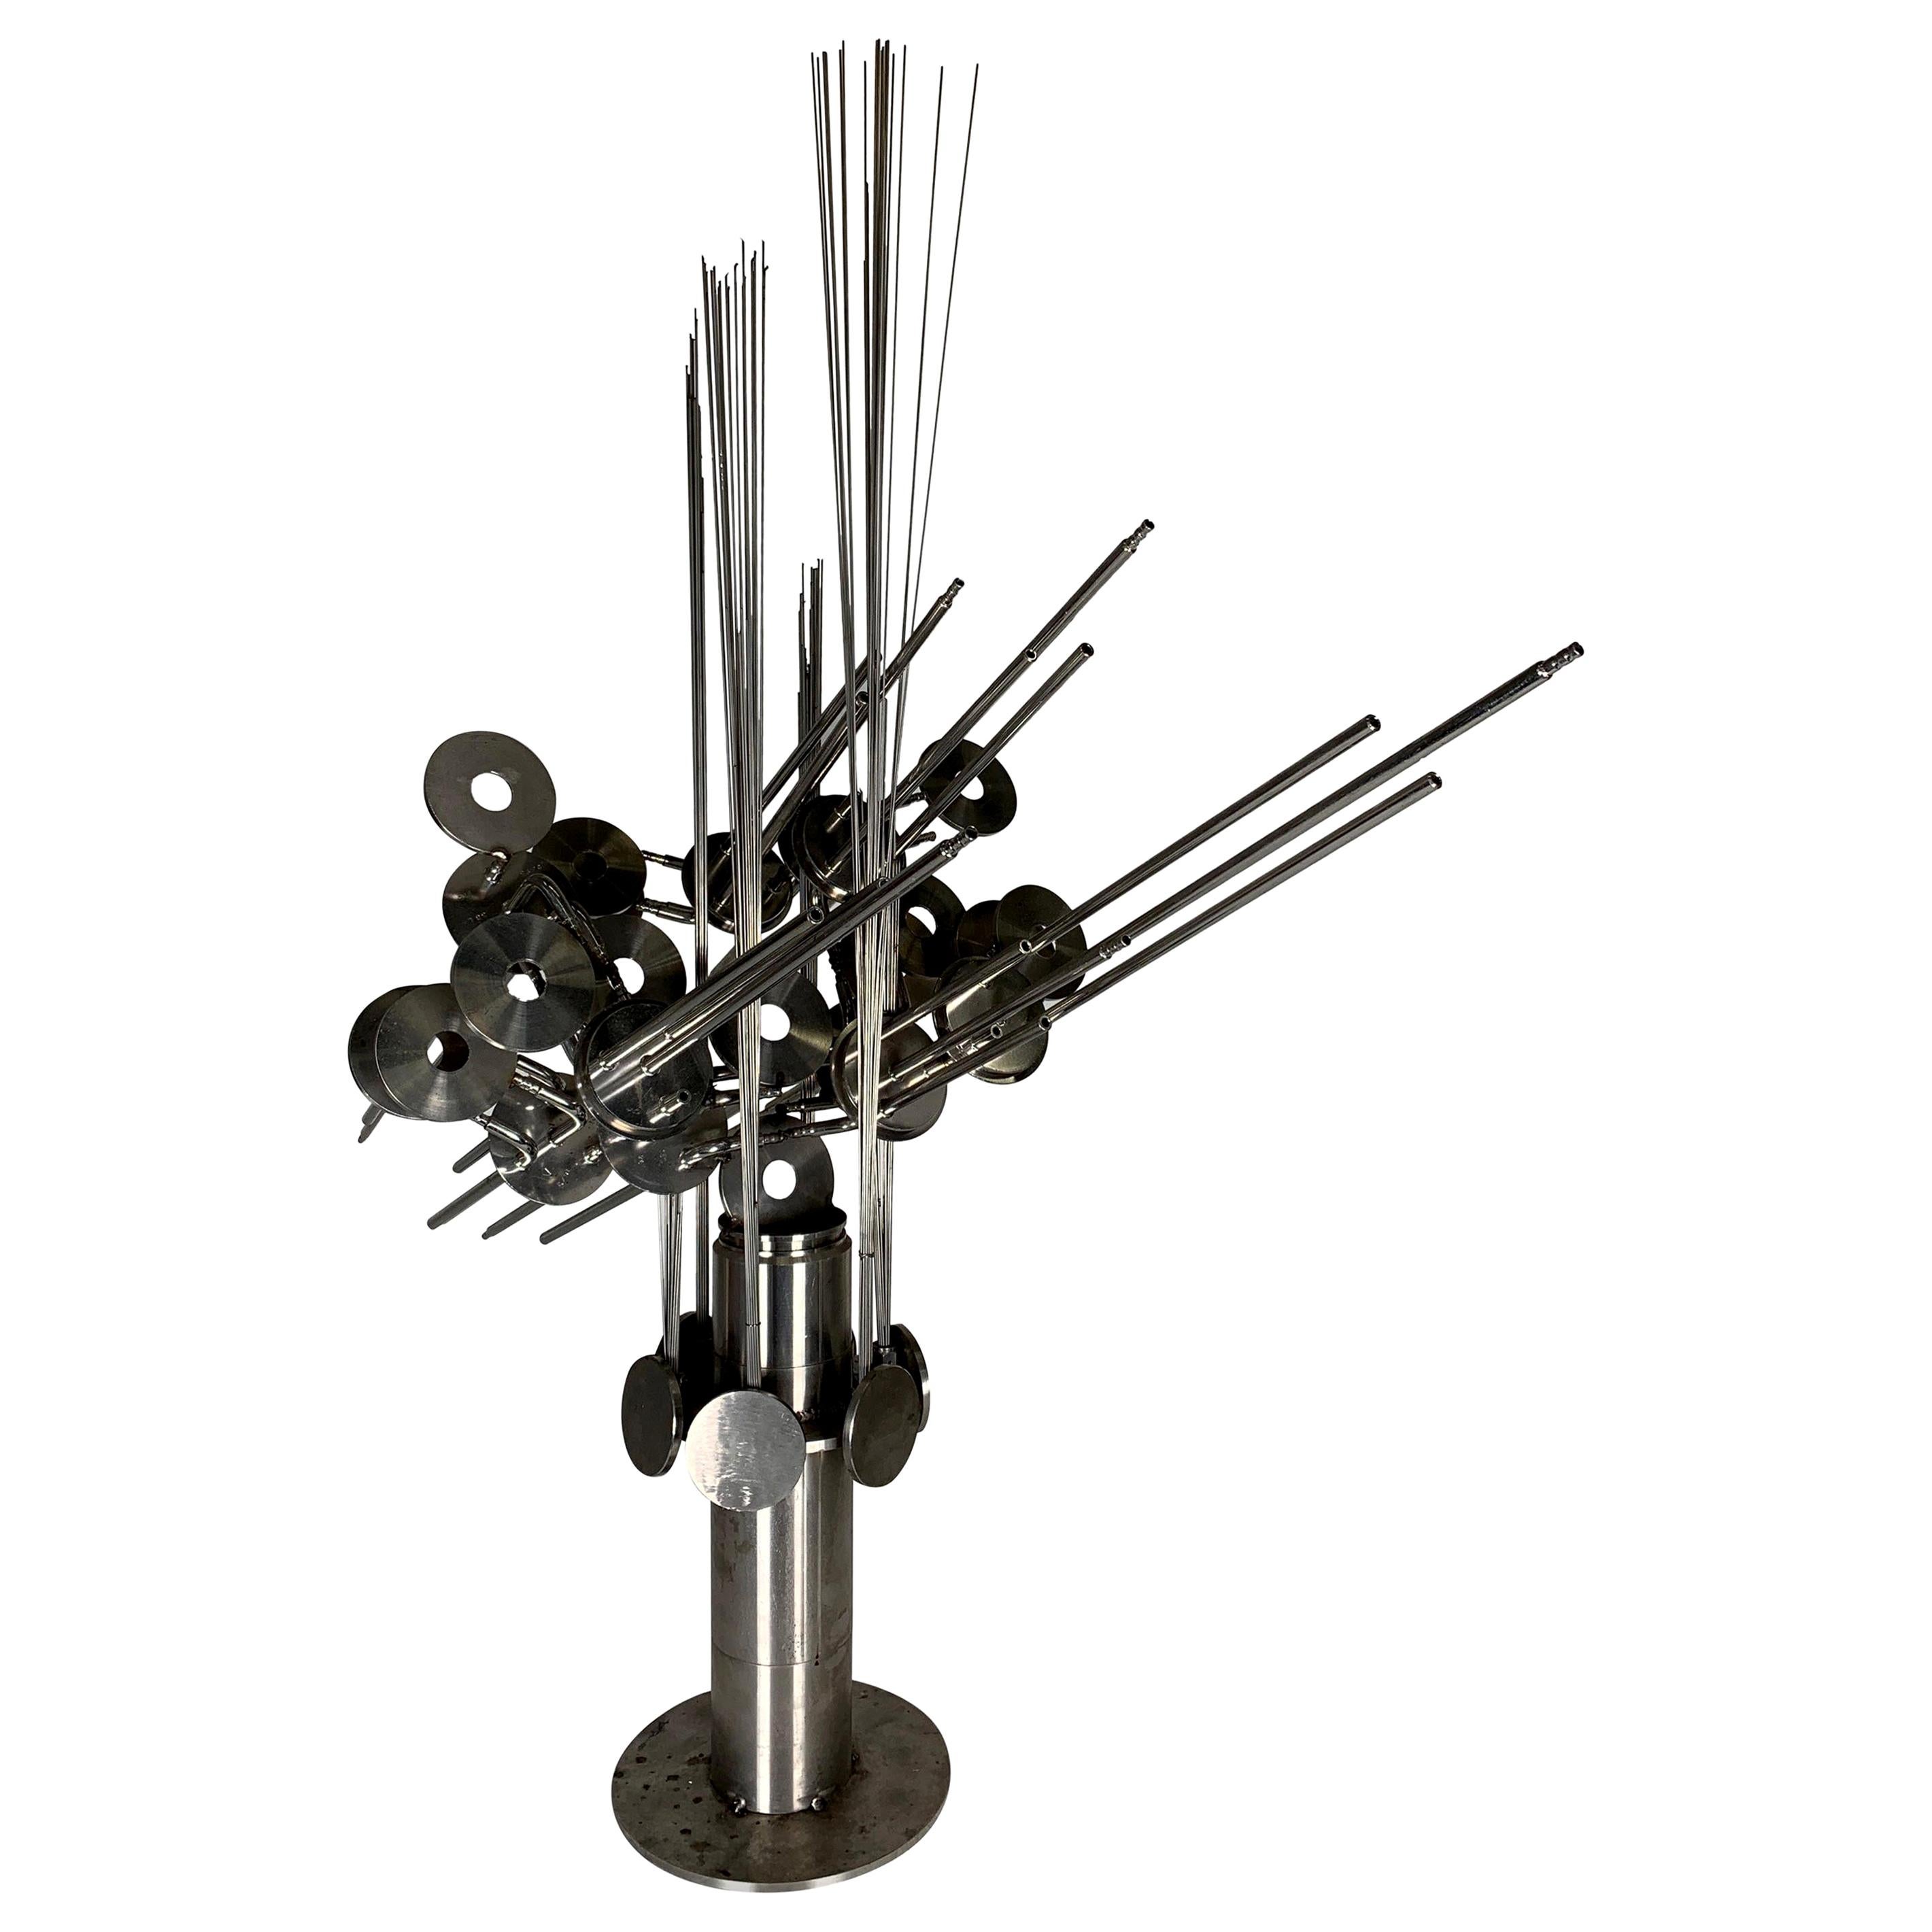 Welded Steel Table Sculpture "Interdimensional Antennae" by D. Phillips For Sale